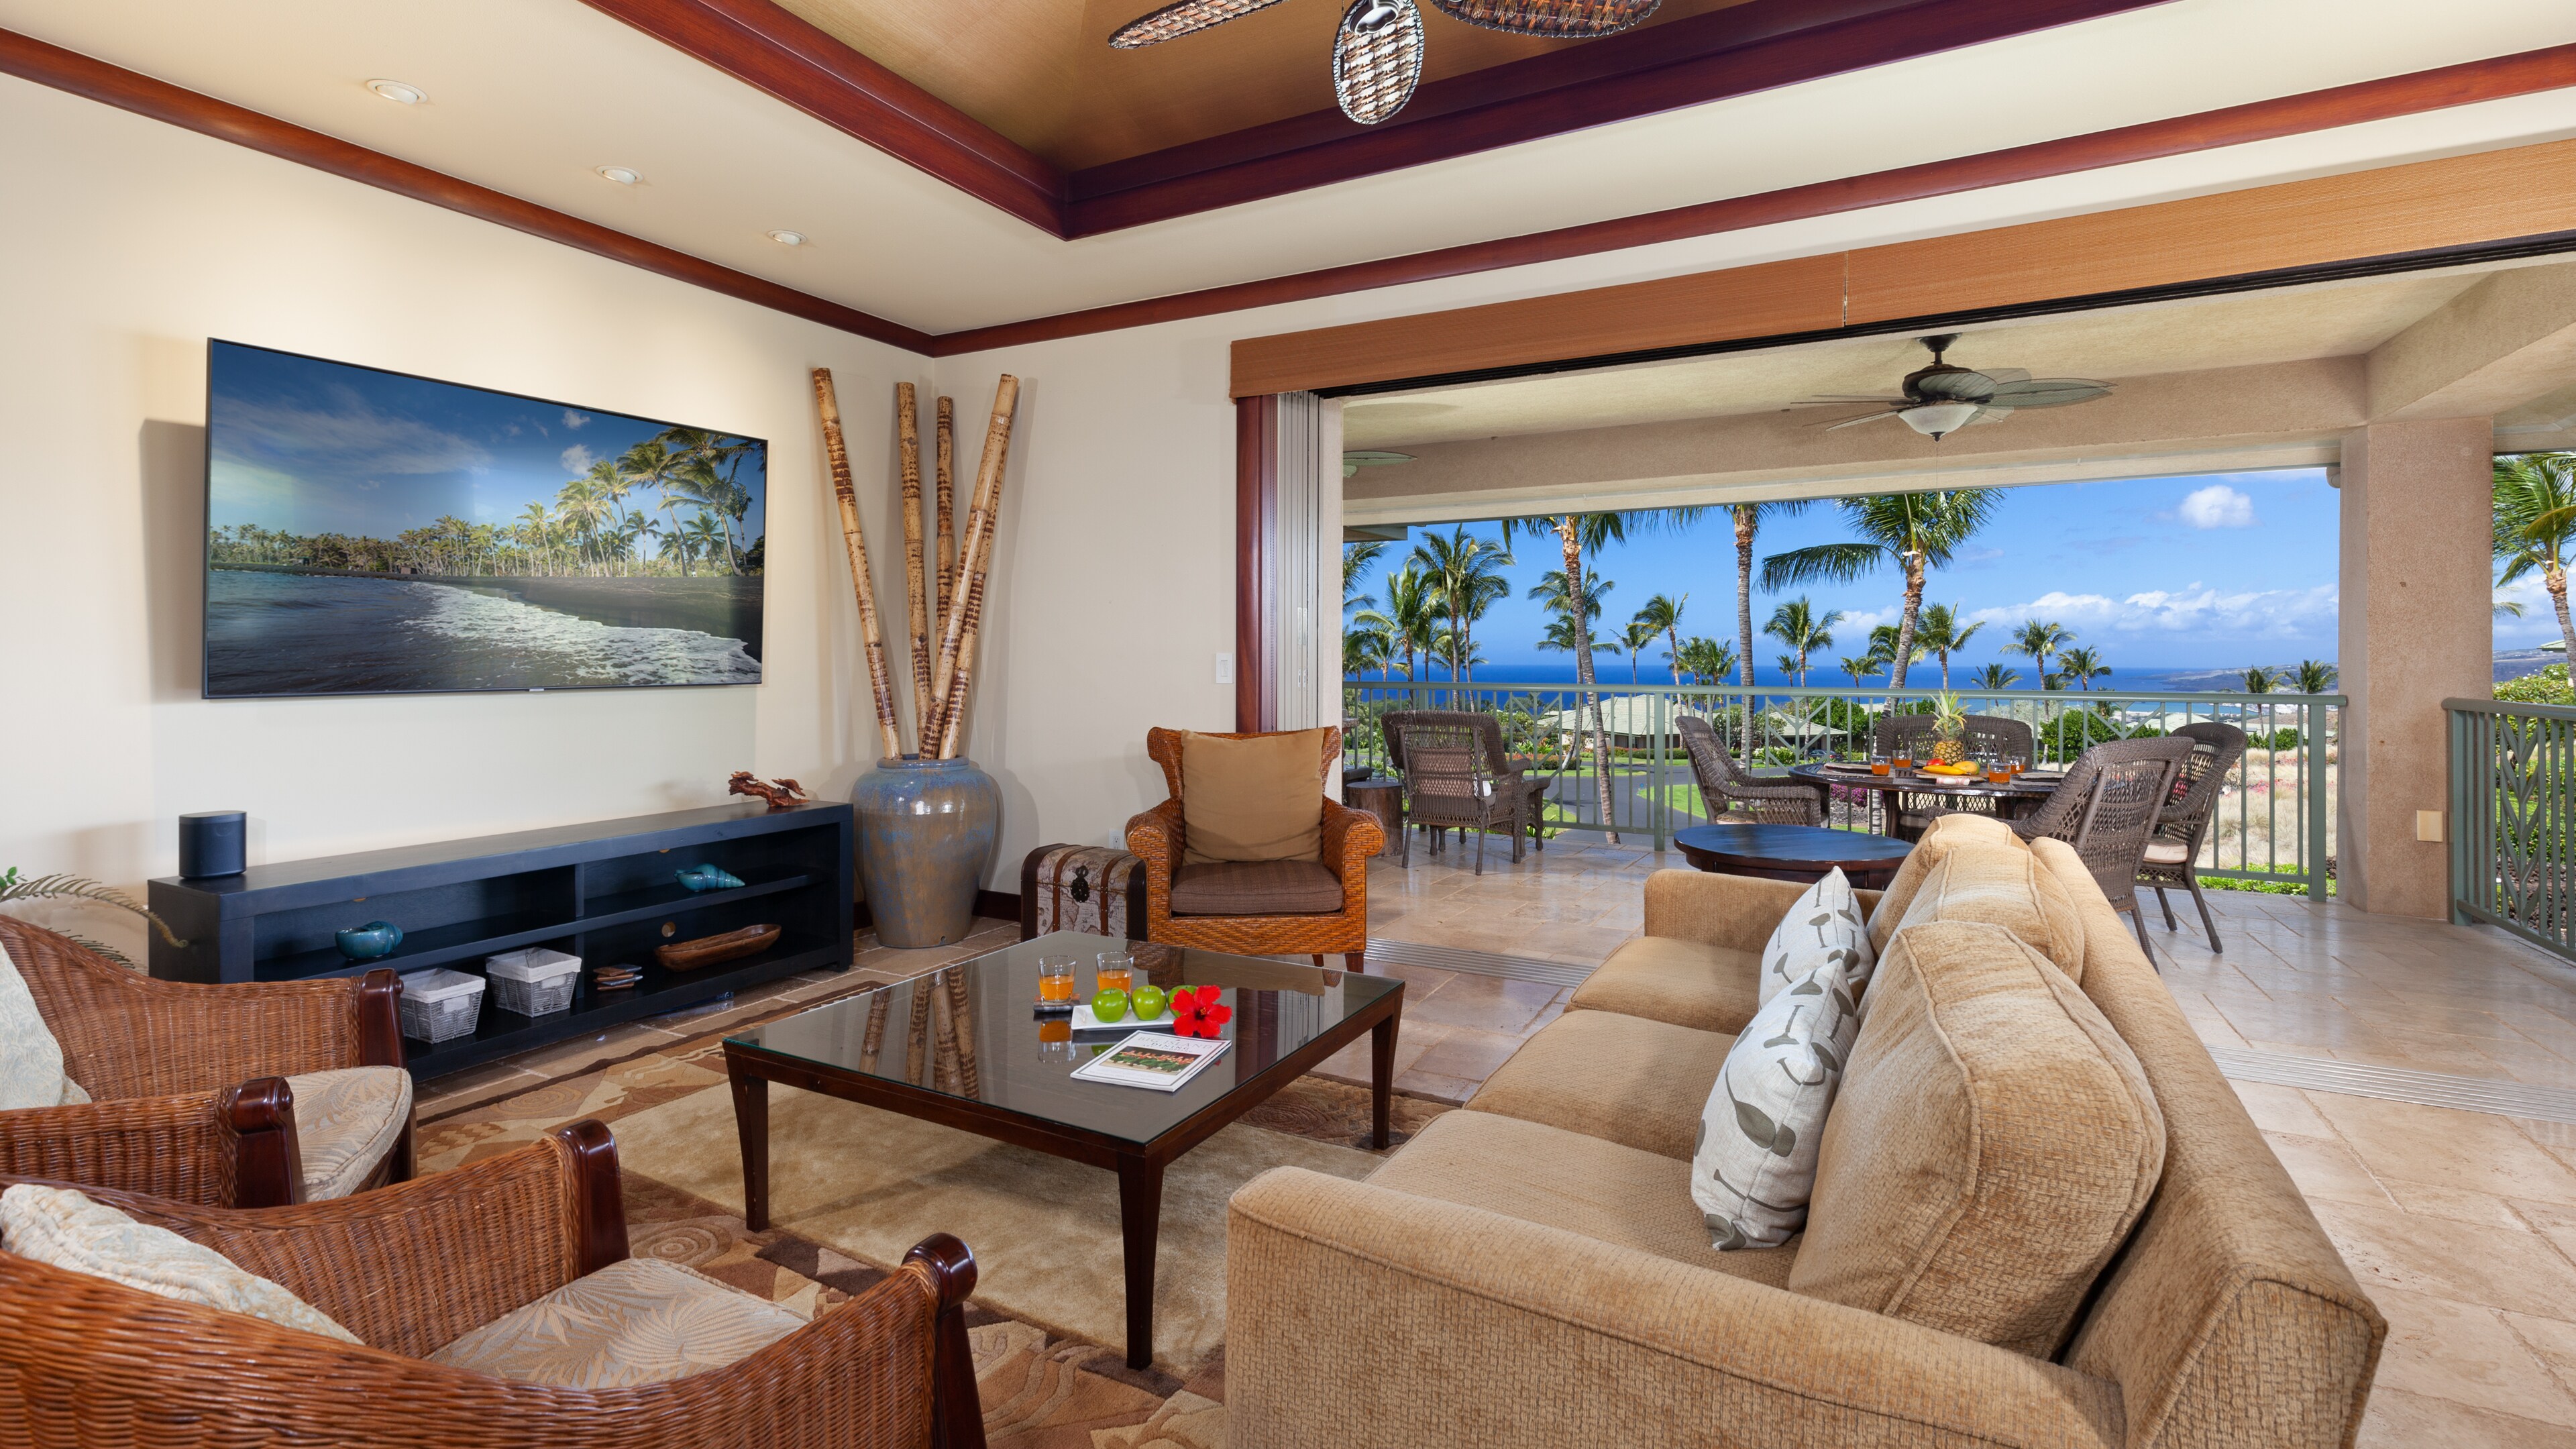 Large pocket doors open from indoor to outdoor covered lanai